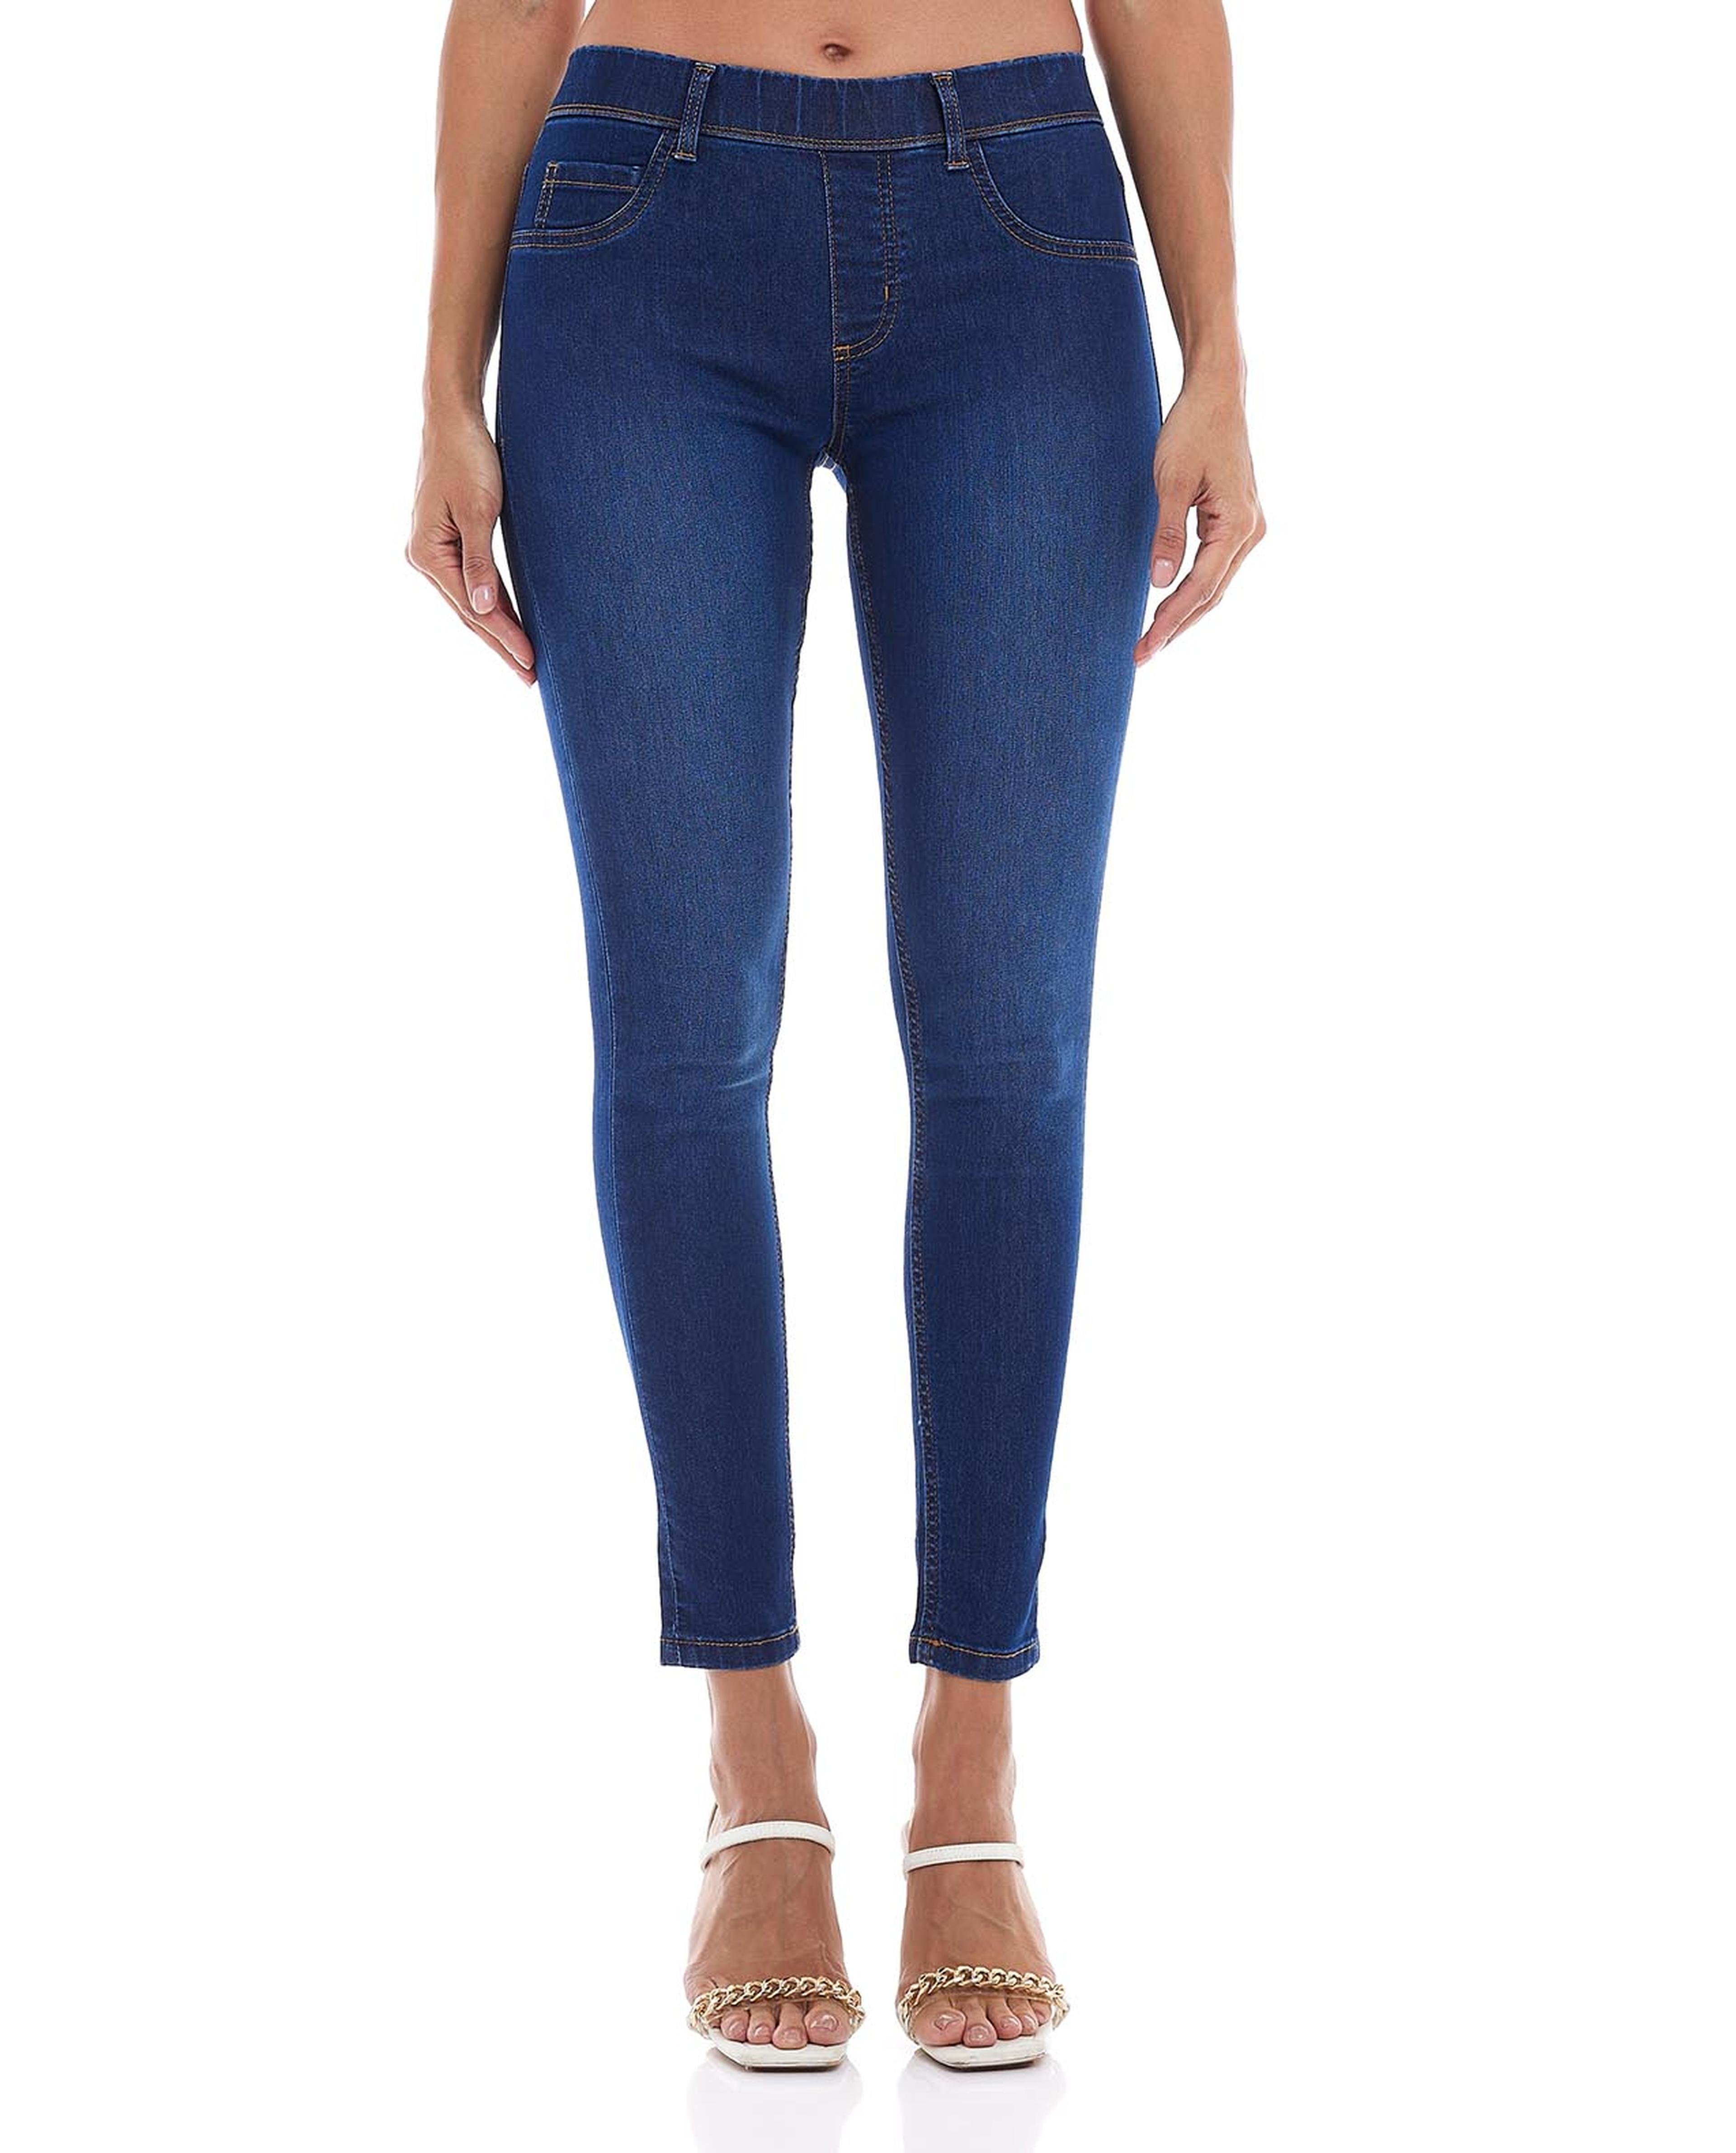 Faded Skinny Fit Jeggings with Elastic Waist